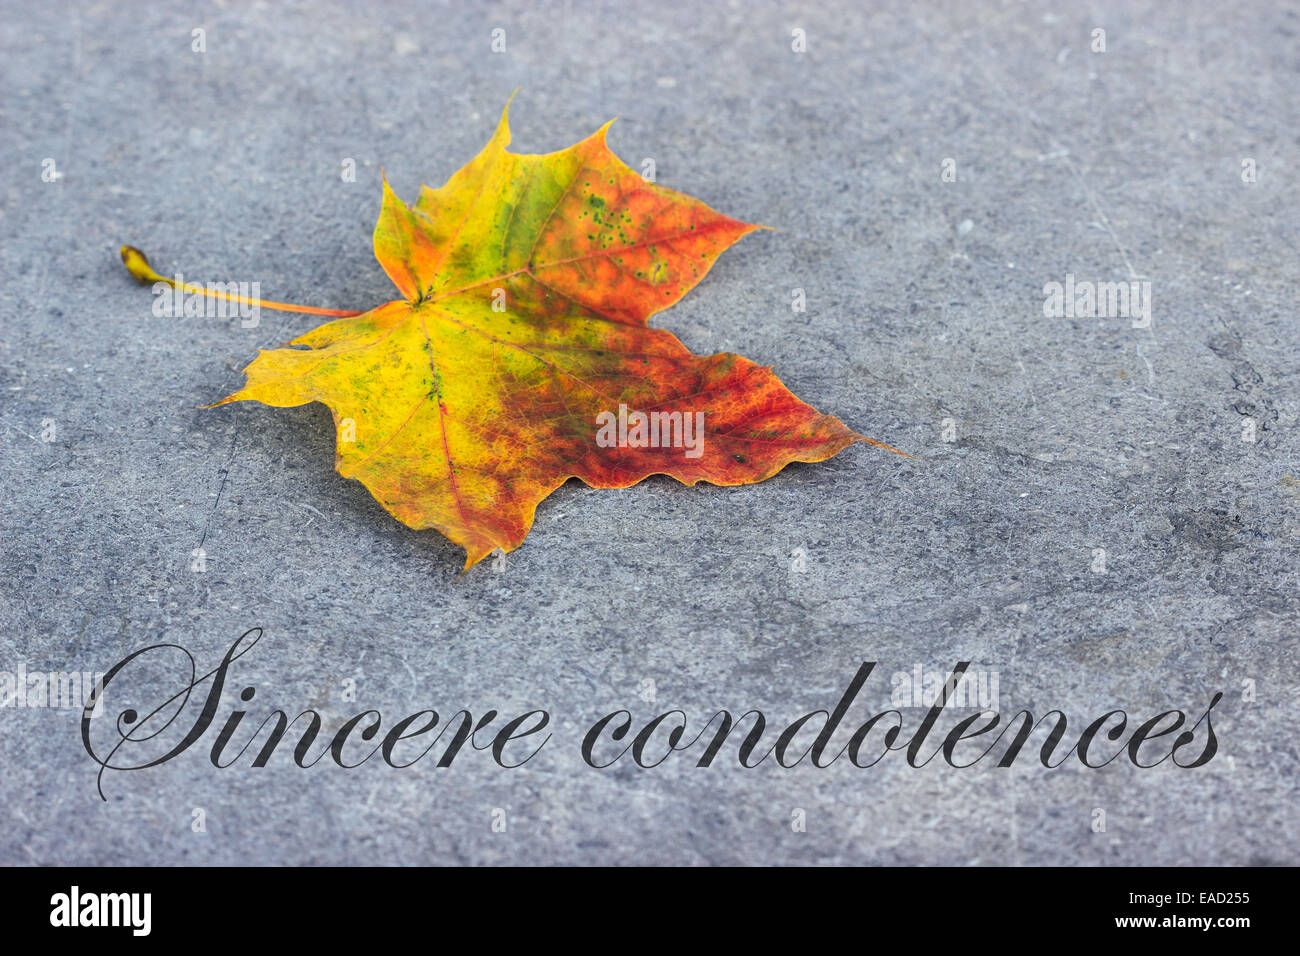 english mourning card with autumn leaves Stock Photo